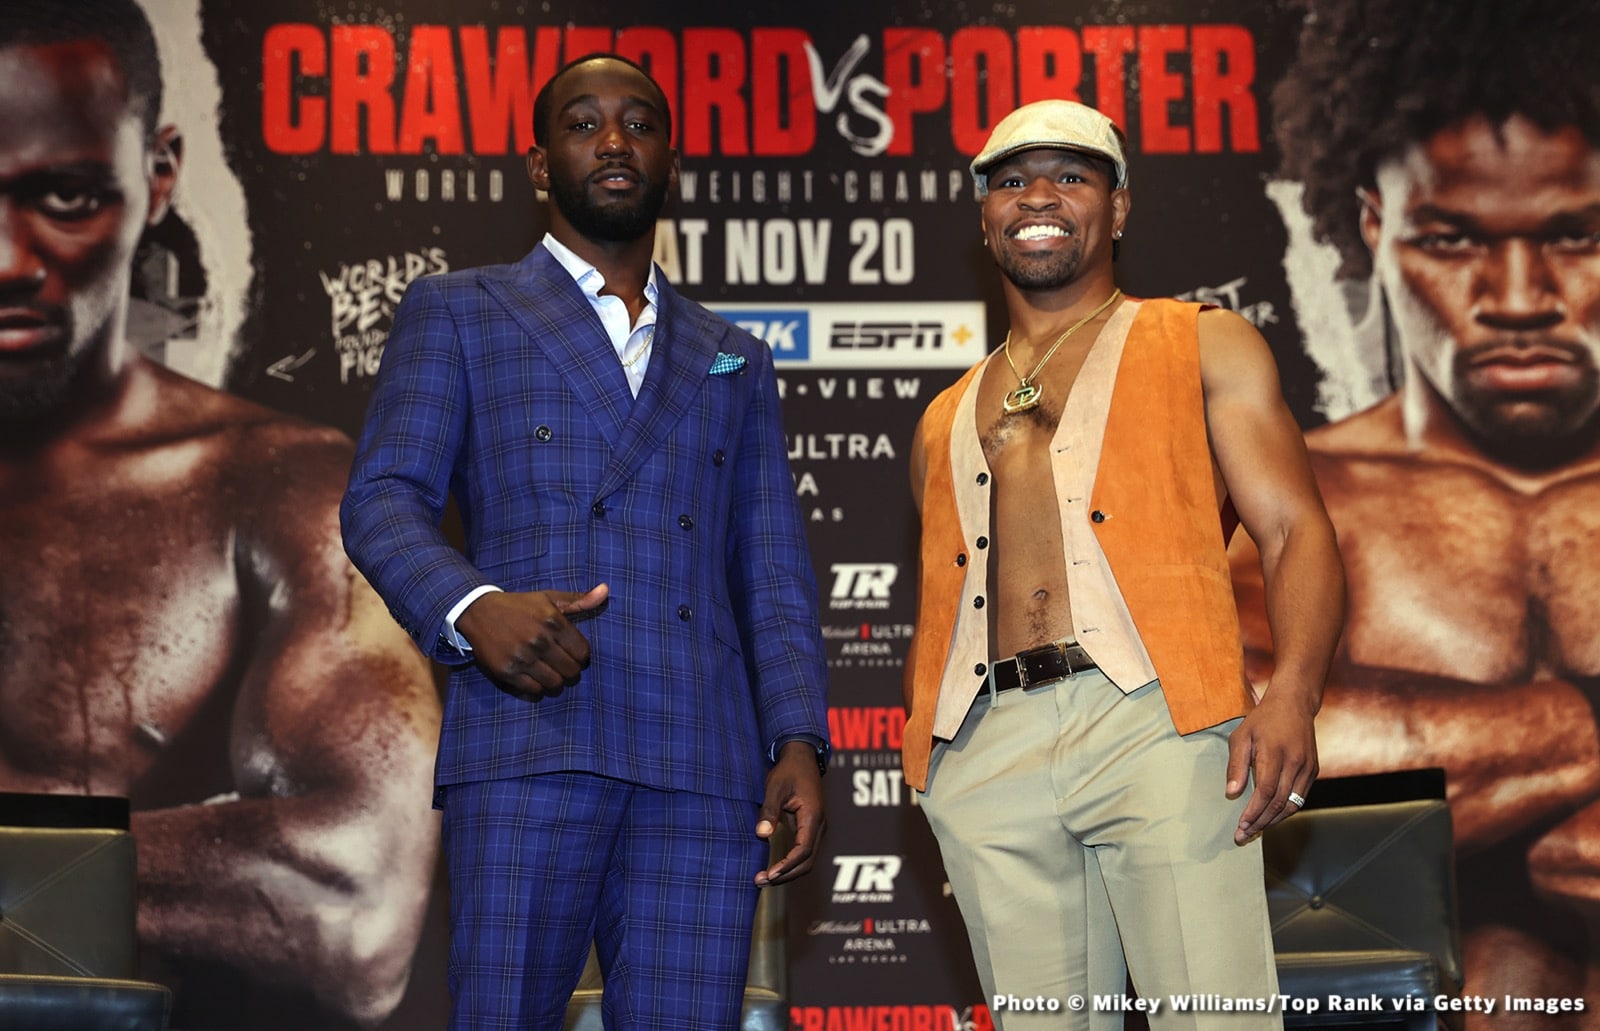 Crawford vs Porter: Official Scouting Report